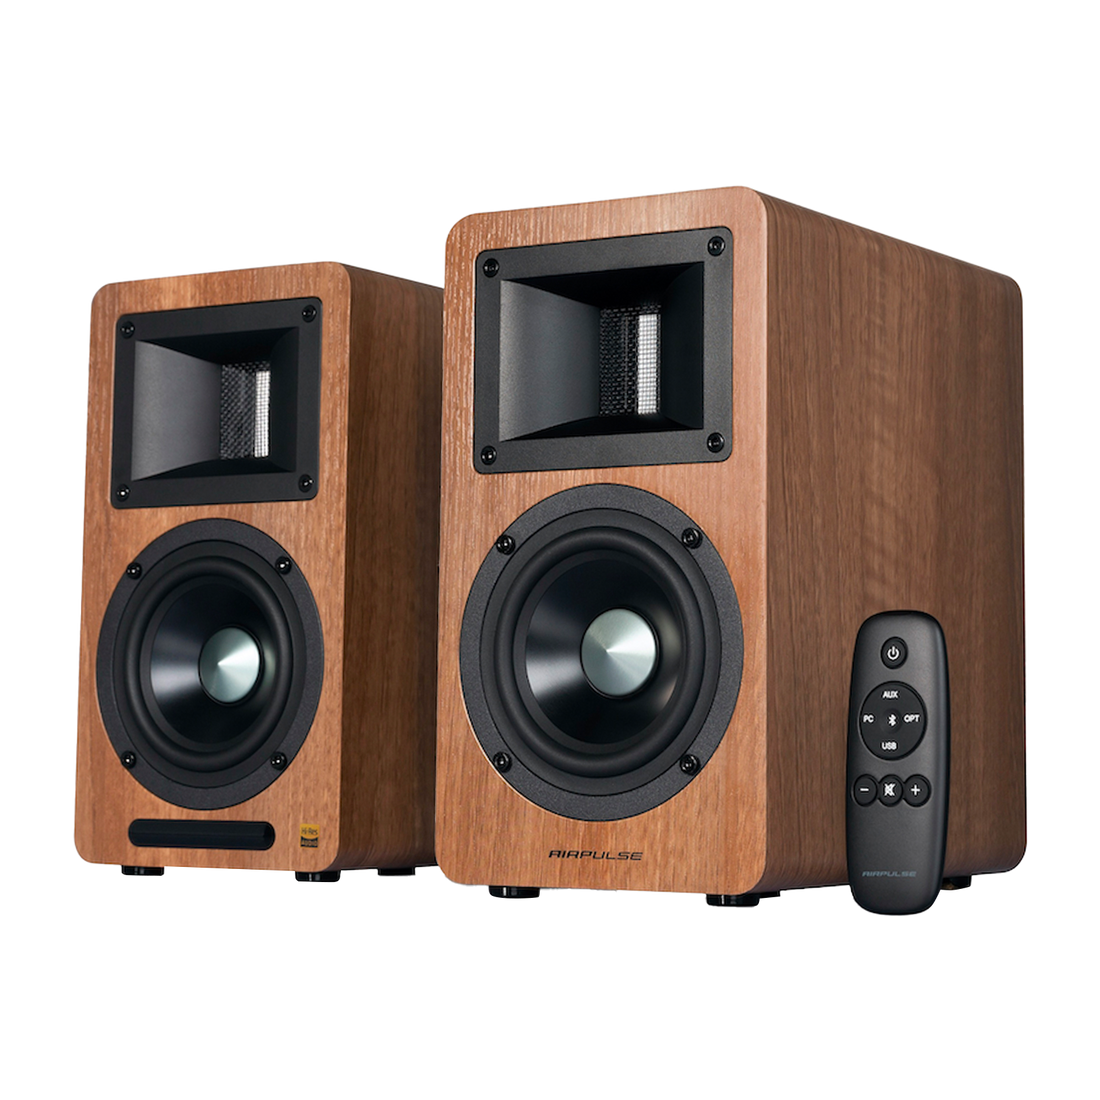 Airpulse A80 Hi-Res Active Speaker System